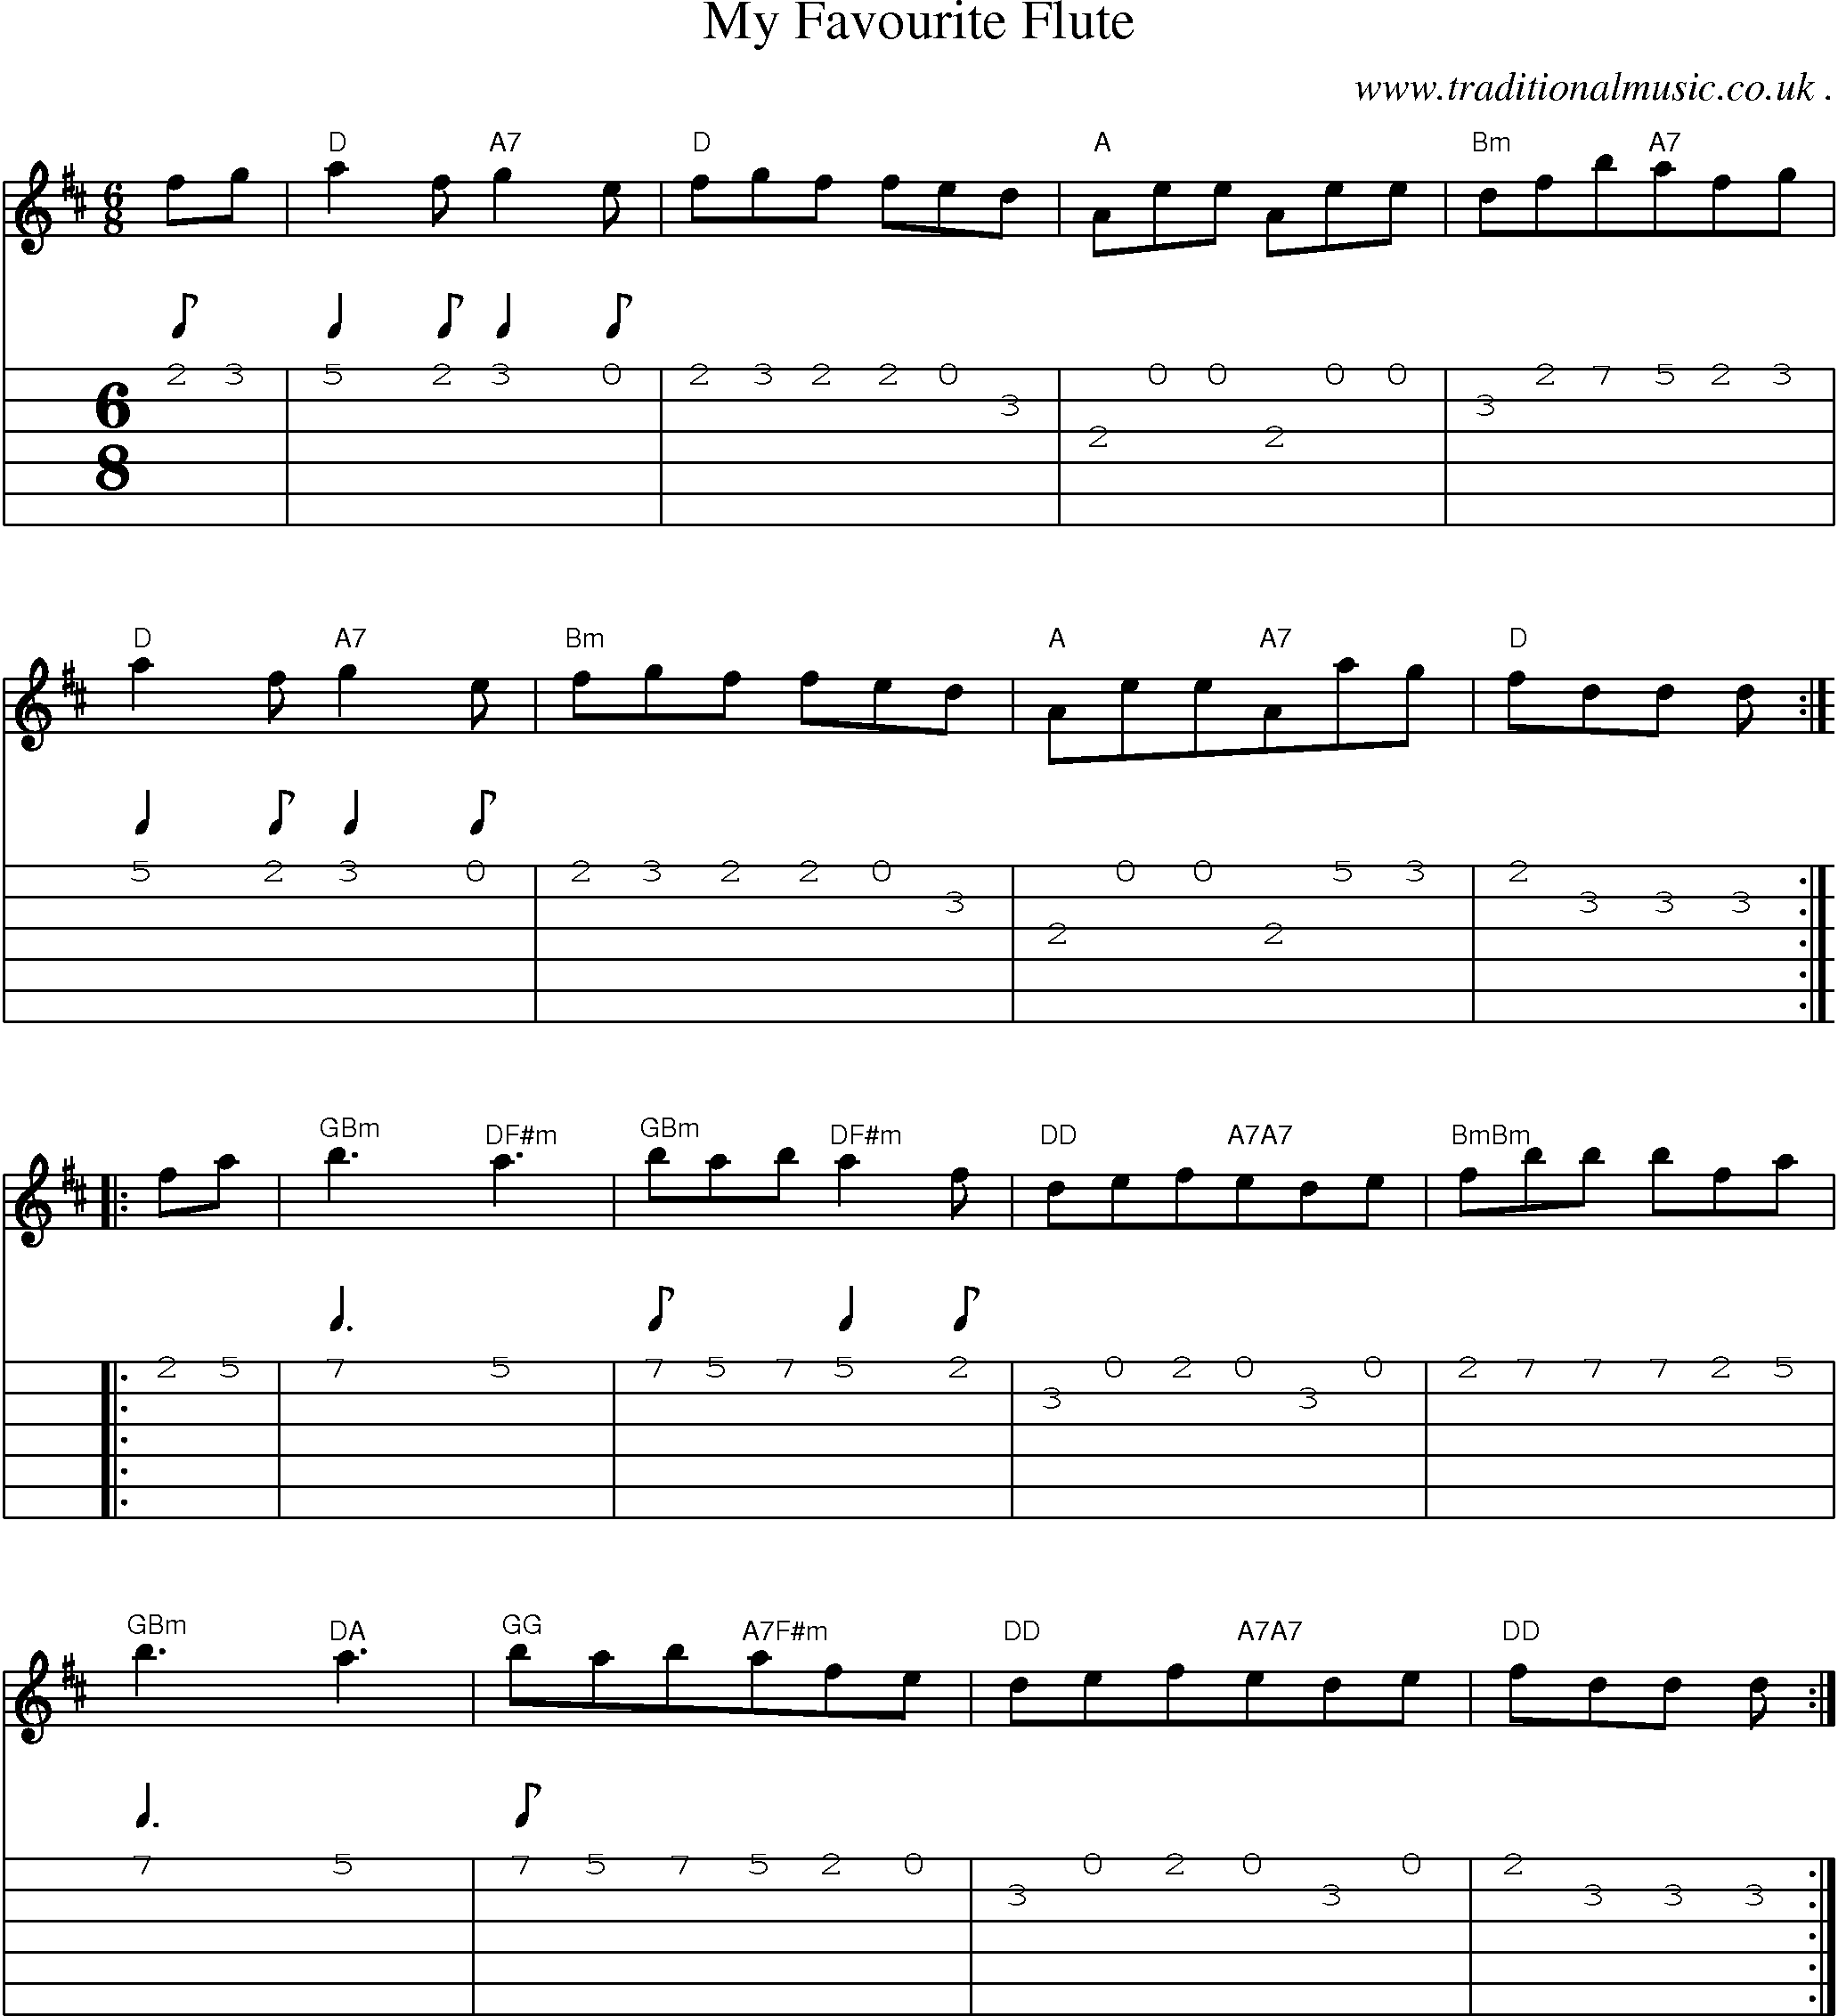 Sheet-Music and Guitar Tabs for My Favourite Flute